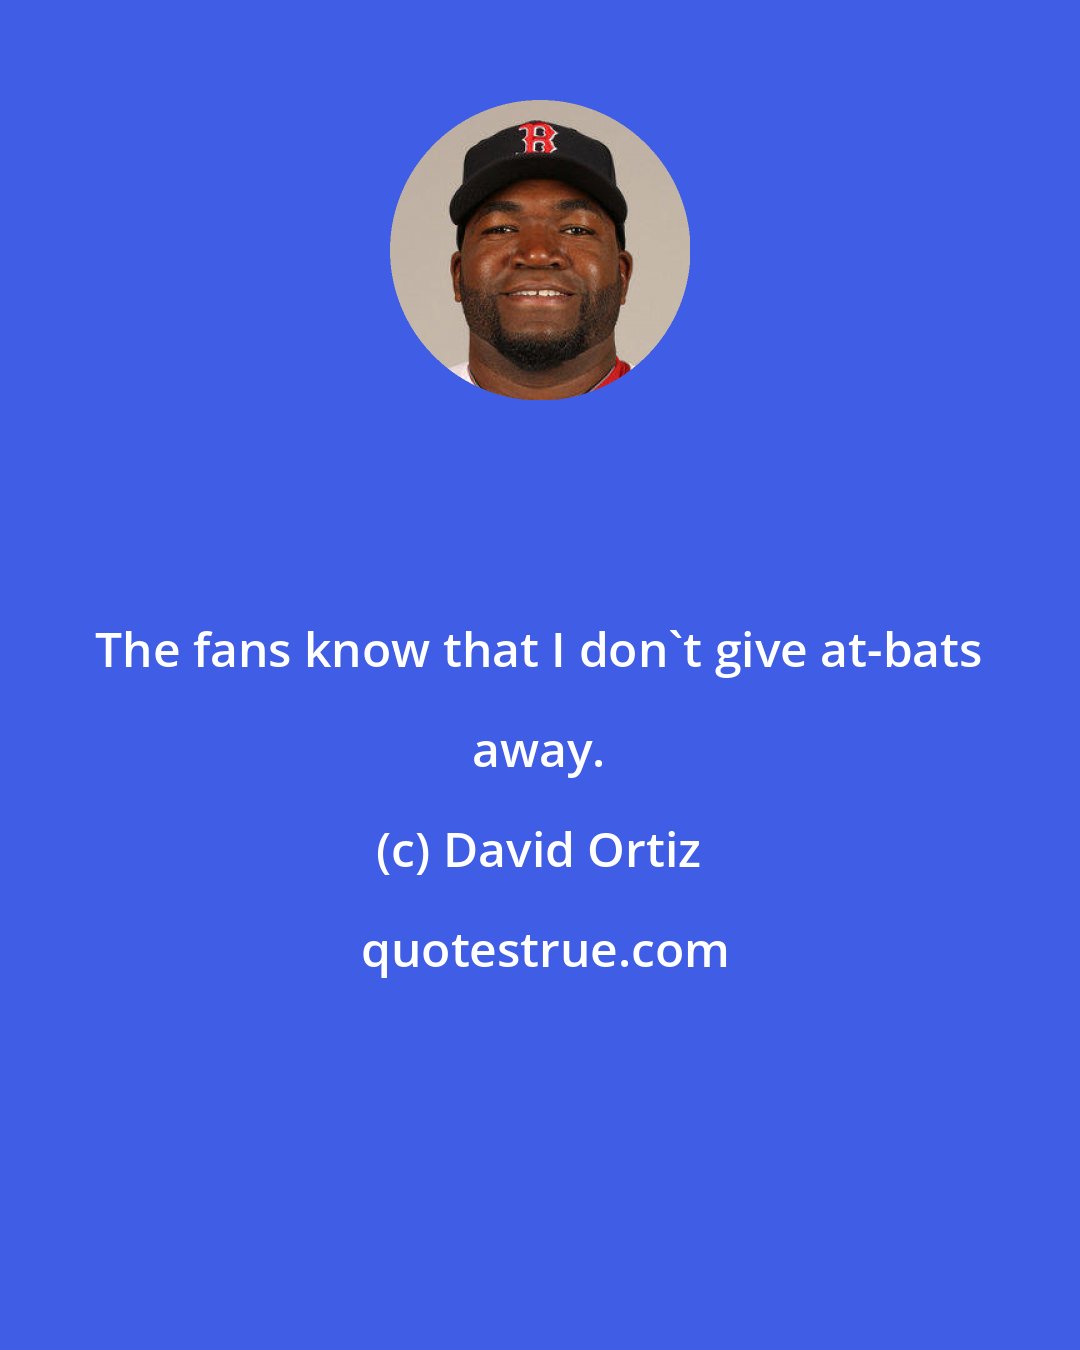 David Ortiz: The fans know that I don't give at-bats away.